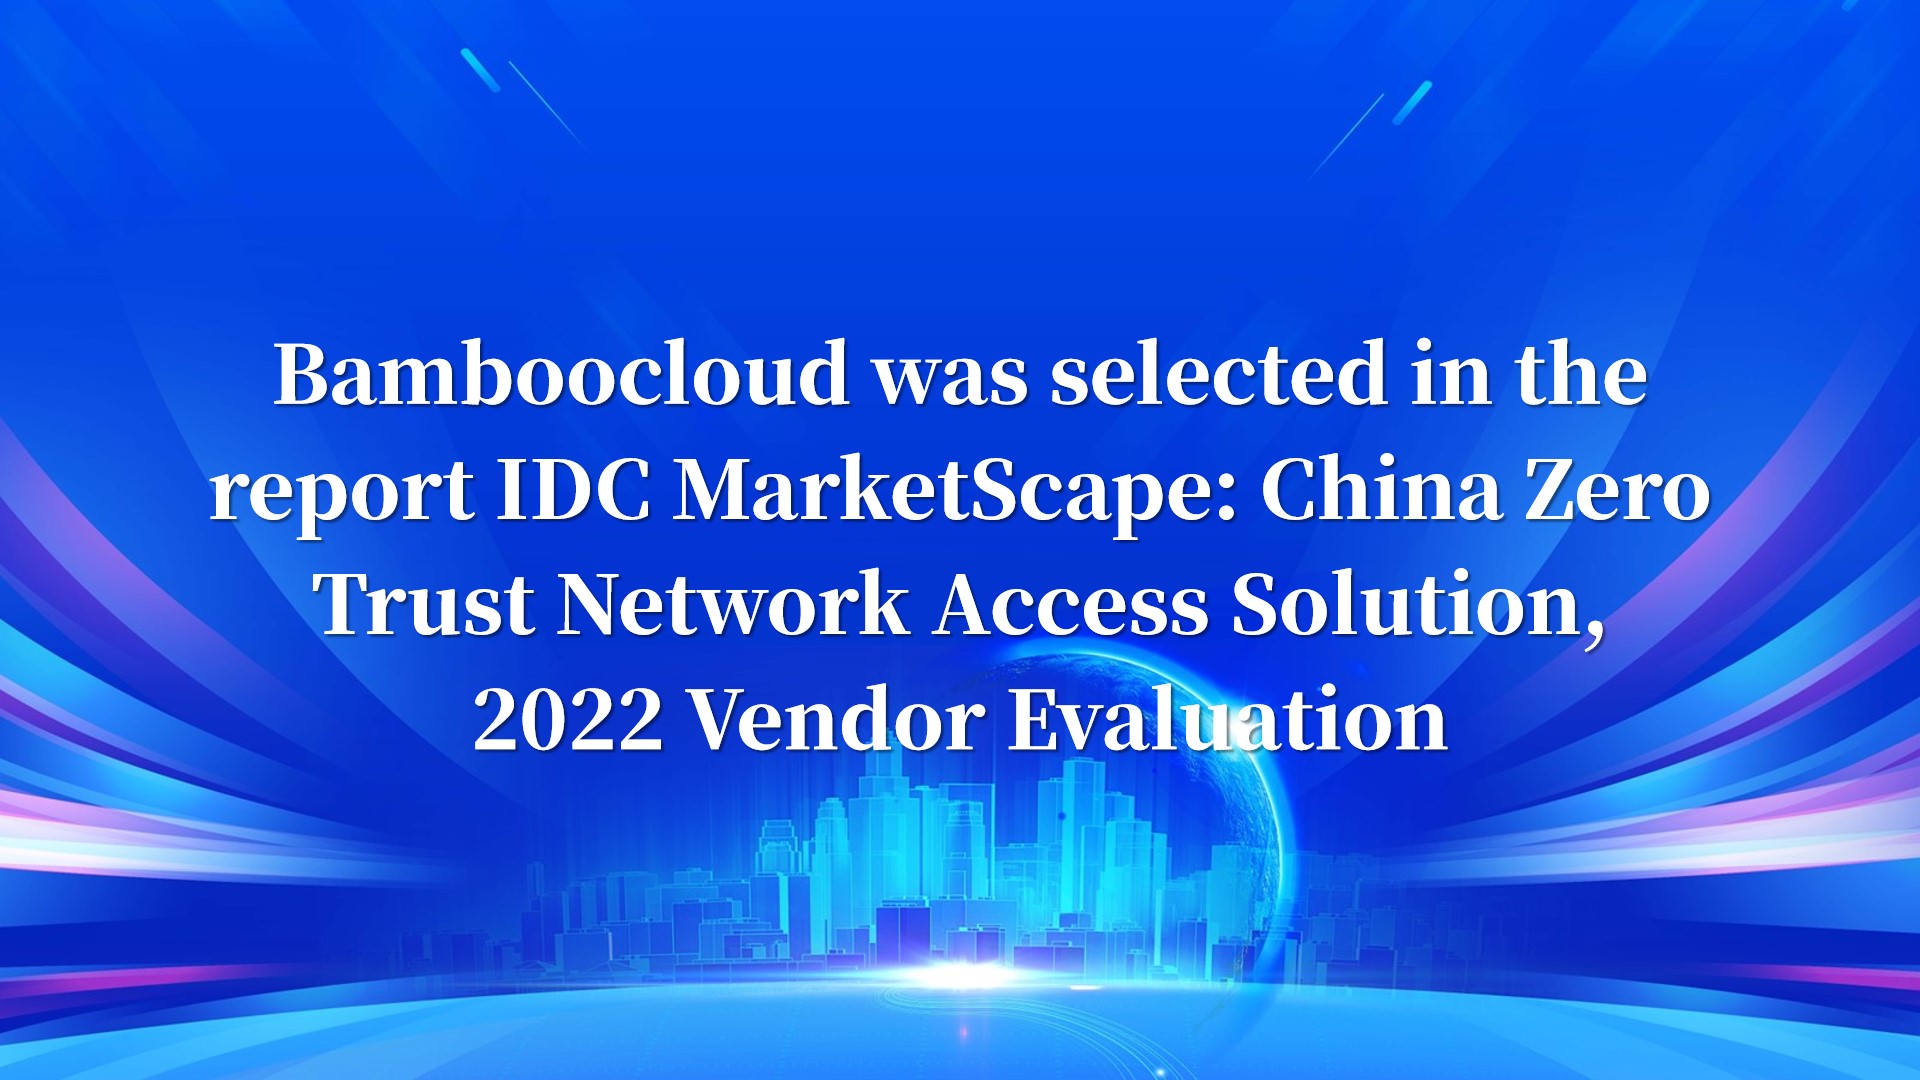 Bamboocloud was selected in the report IDC MarketScape: China Zero Trust Network Access Solution, 2022 Vendor Evaluation